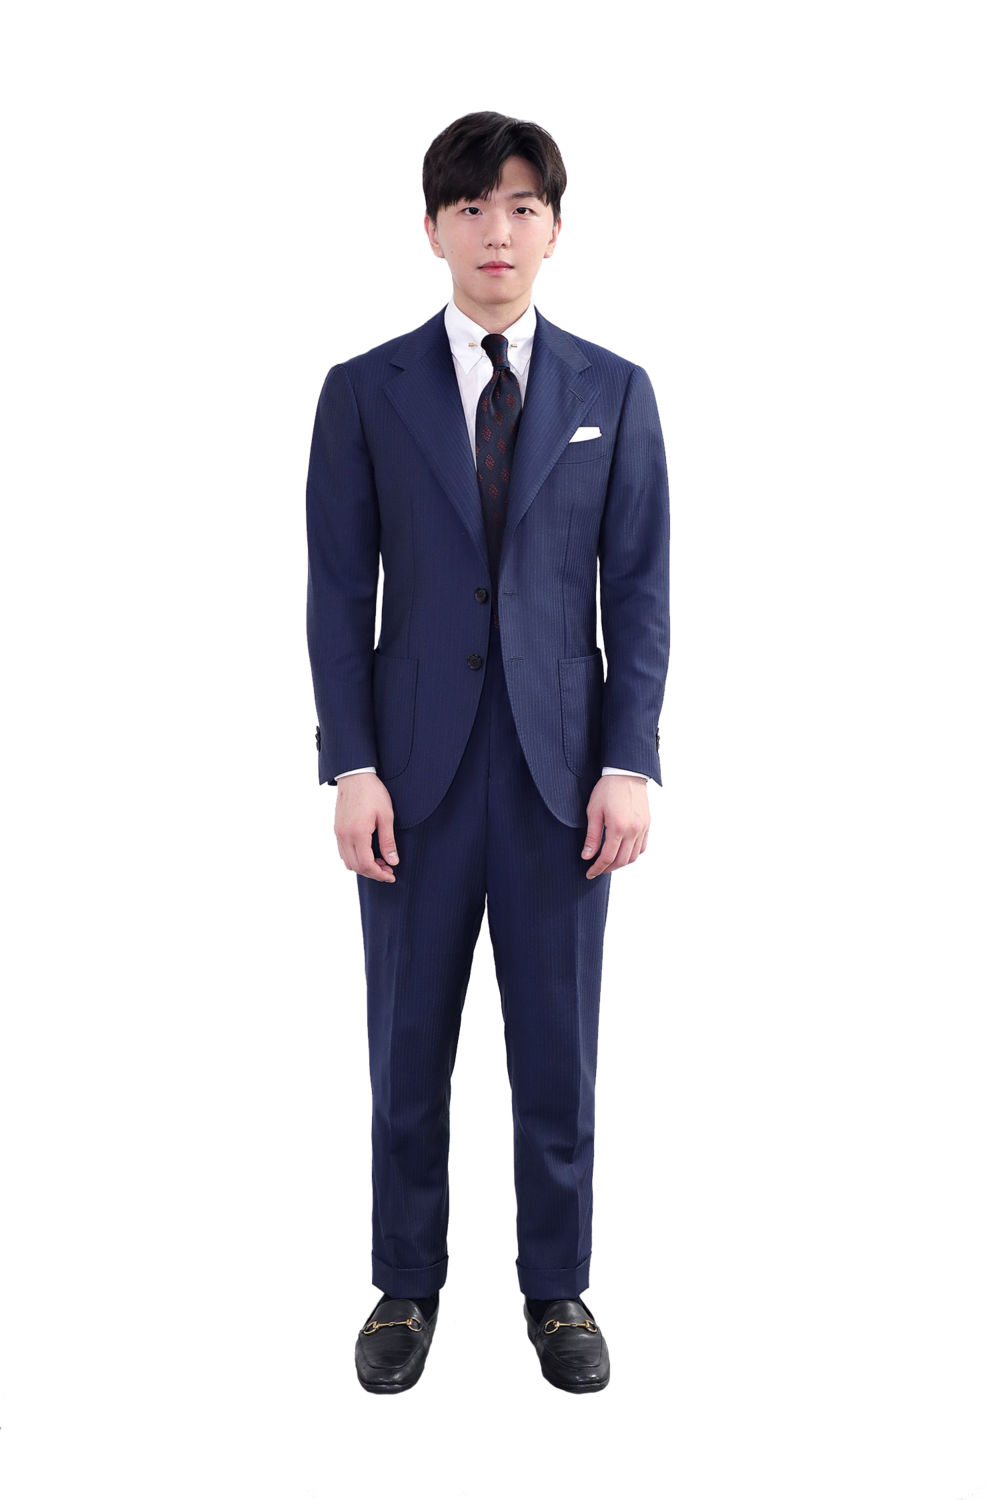 Made Suits® Singapore Tailor — Made Suits Signature Cut